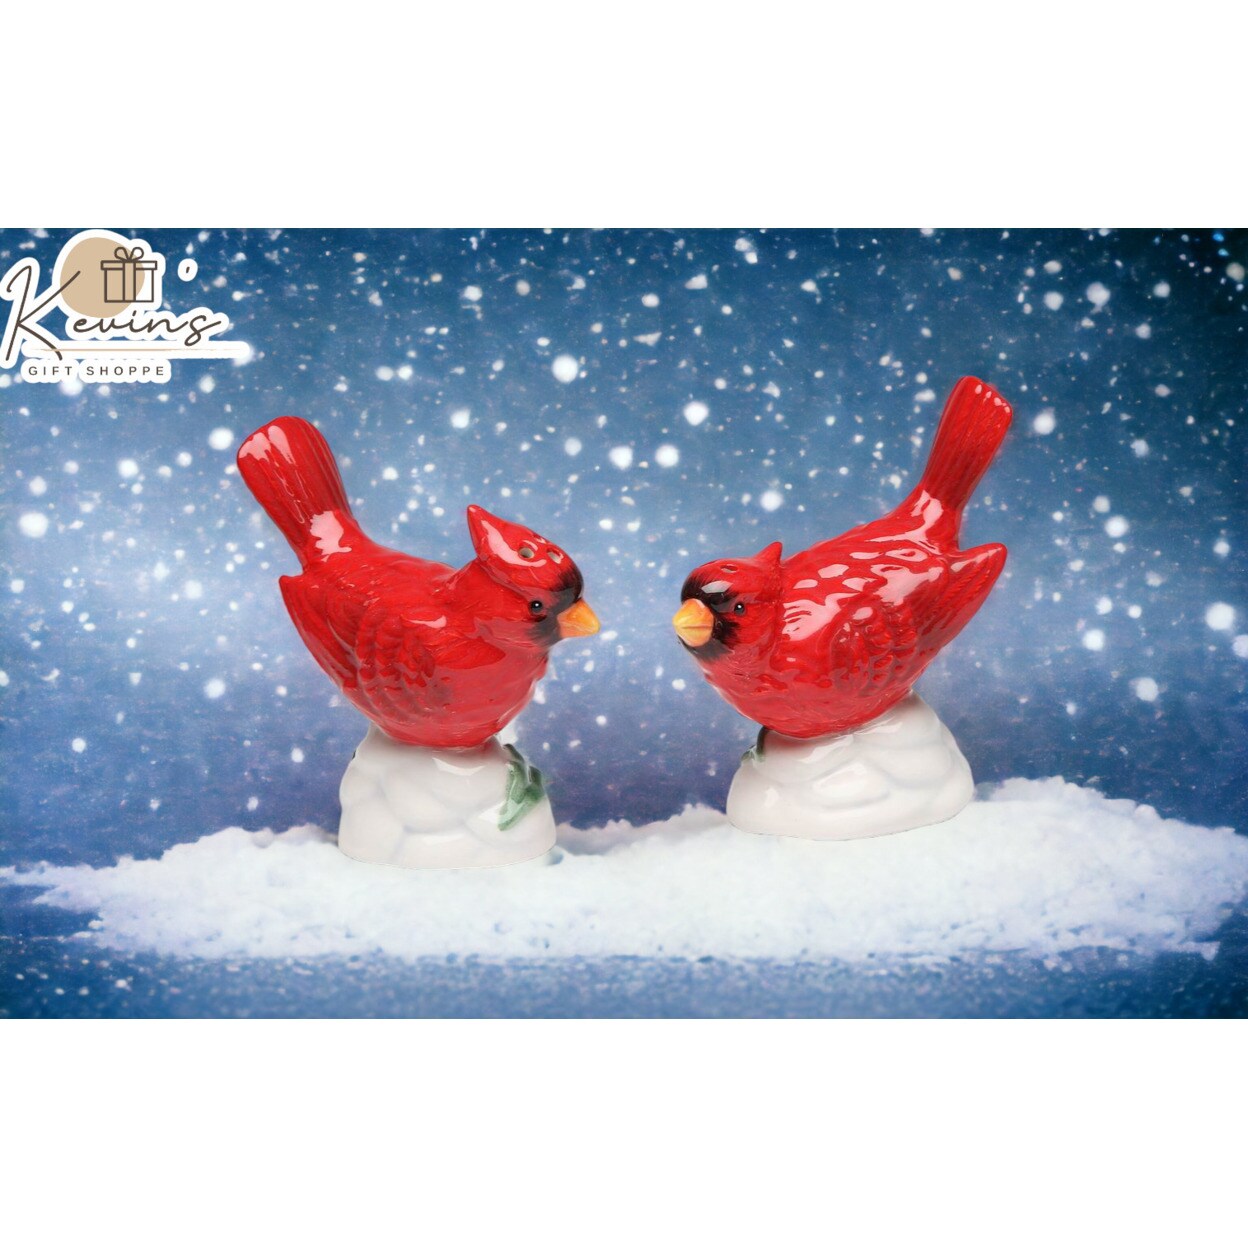 kevinsgiftshoppe Hand Painted Ceramic Cardinal Bird Salt and Pepper Shakers Home Decor   Kitchen Decor